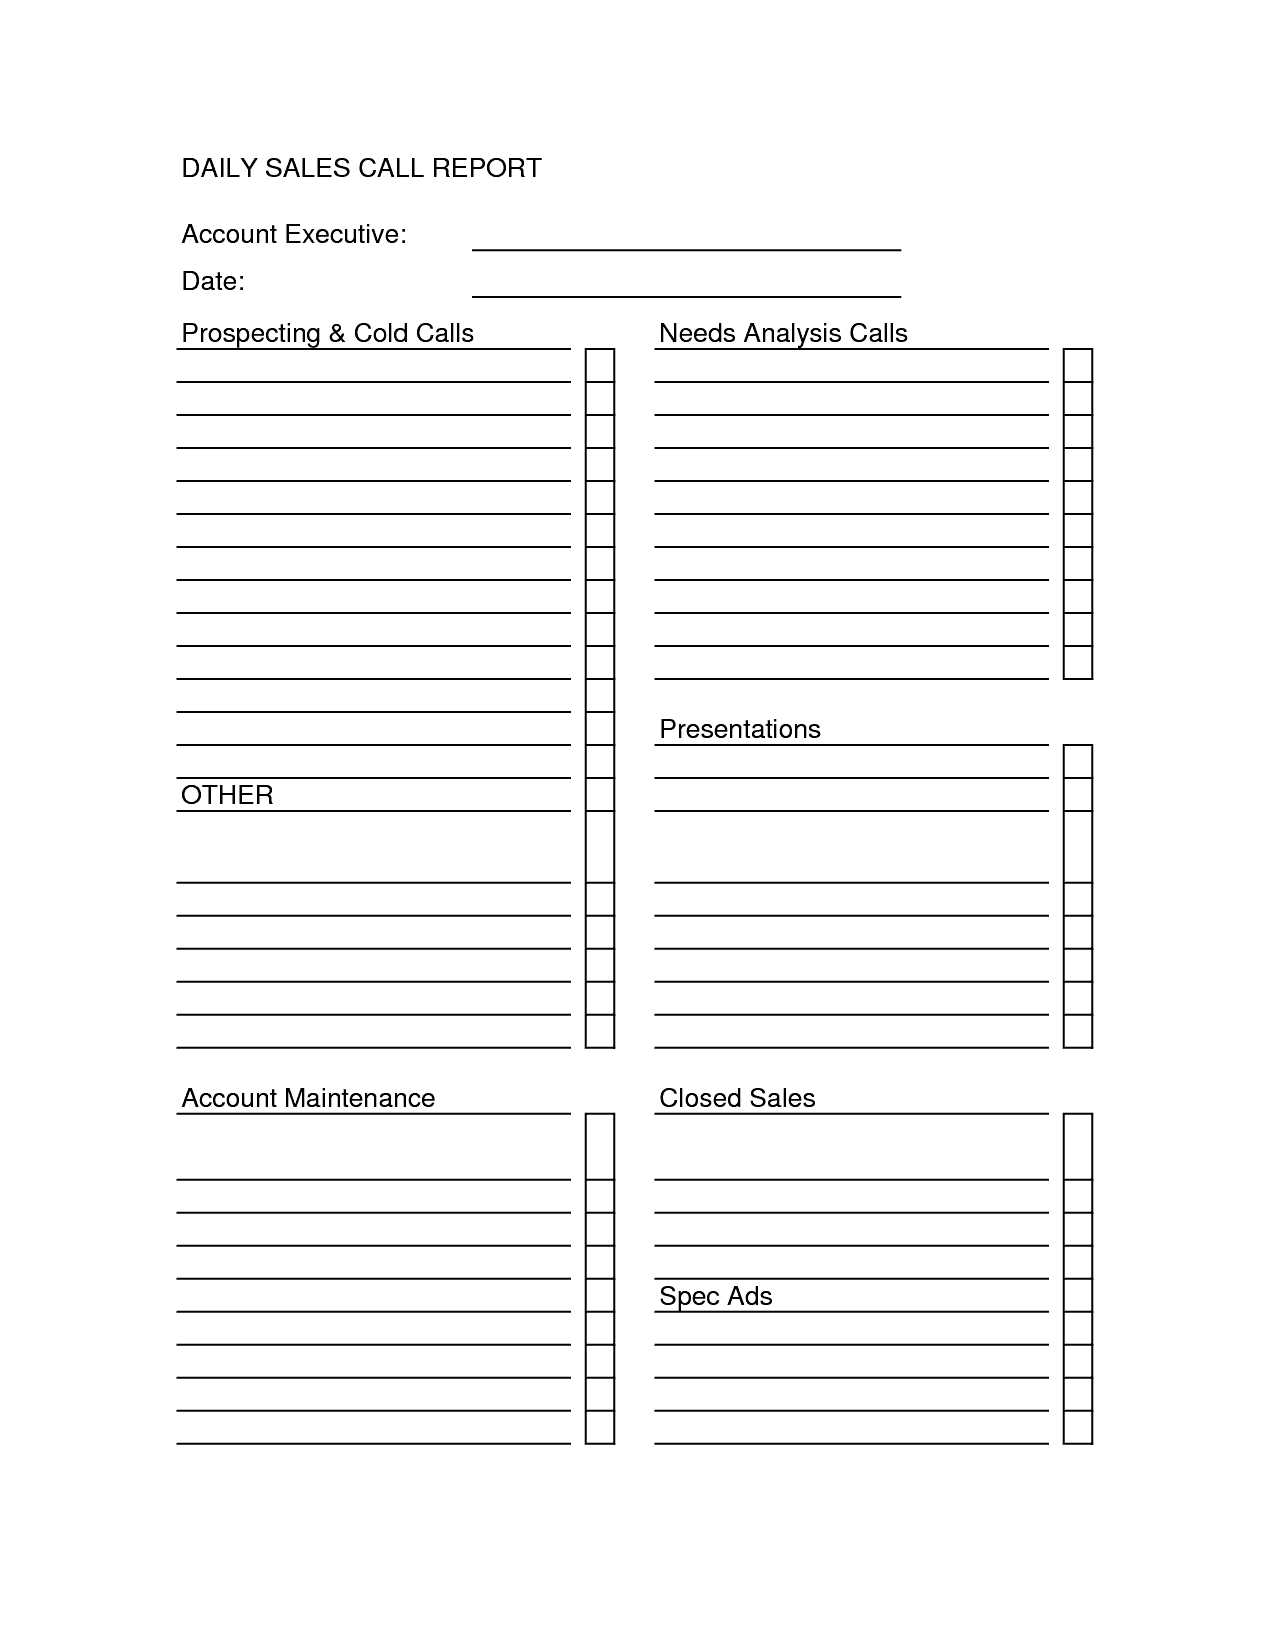 Sales Call Report Templates - Word Excel Fomats In Daily Sales Call Report Template Free Download